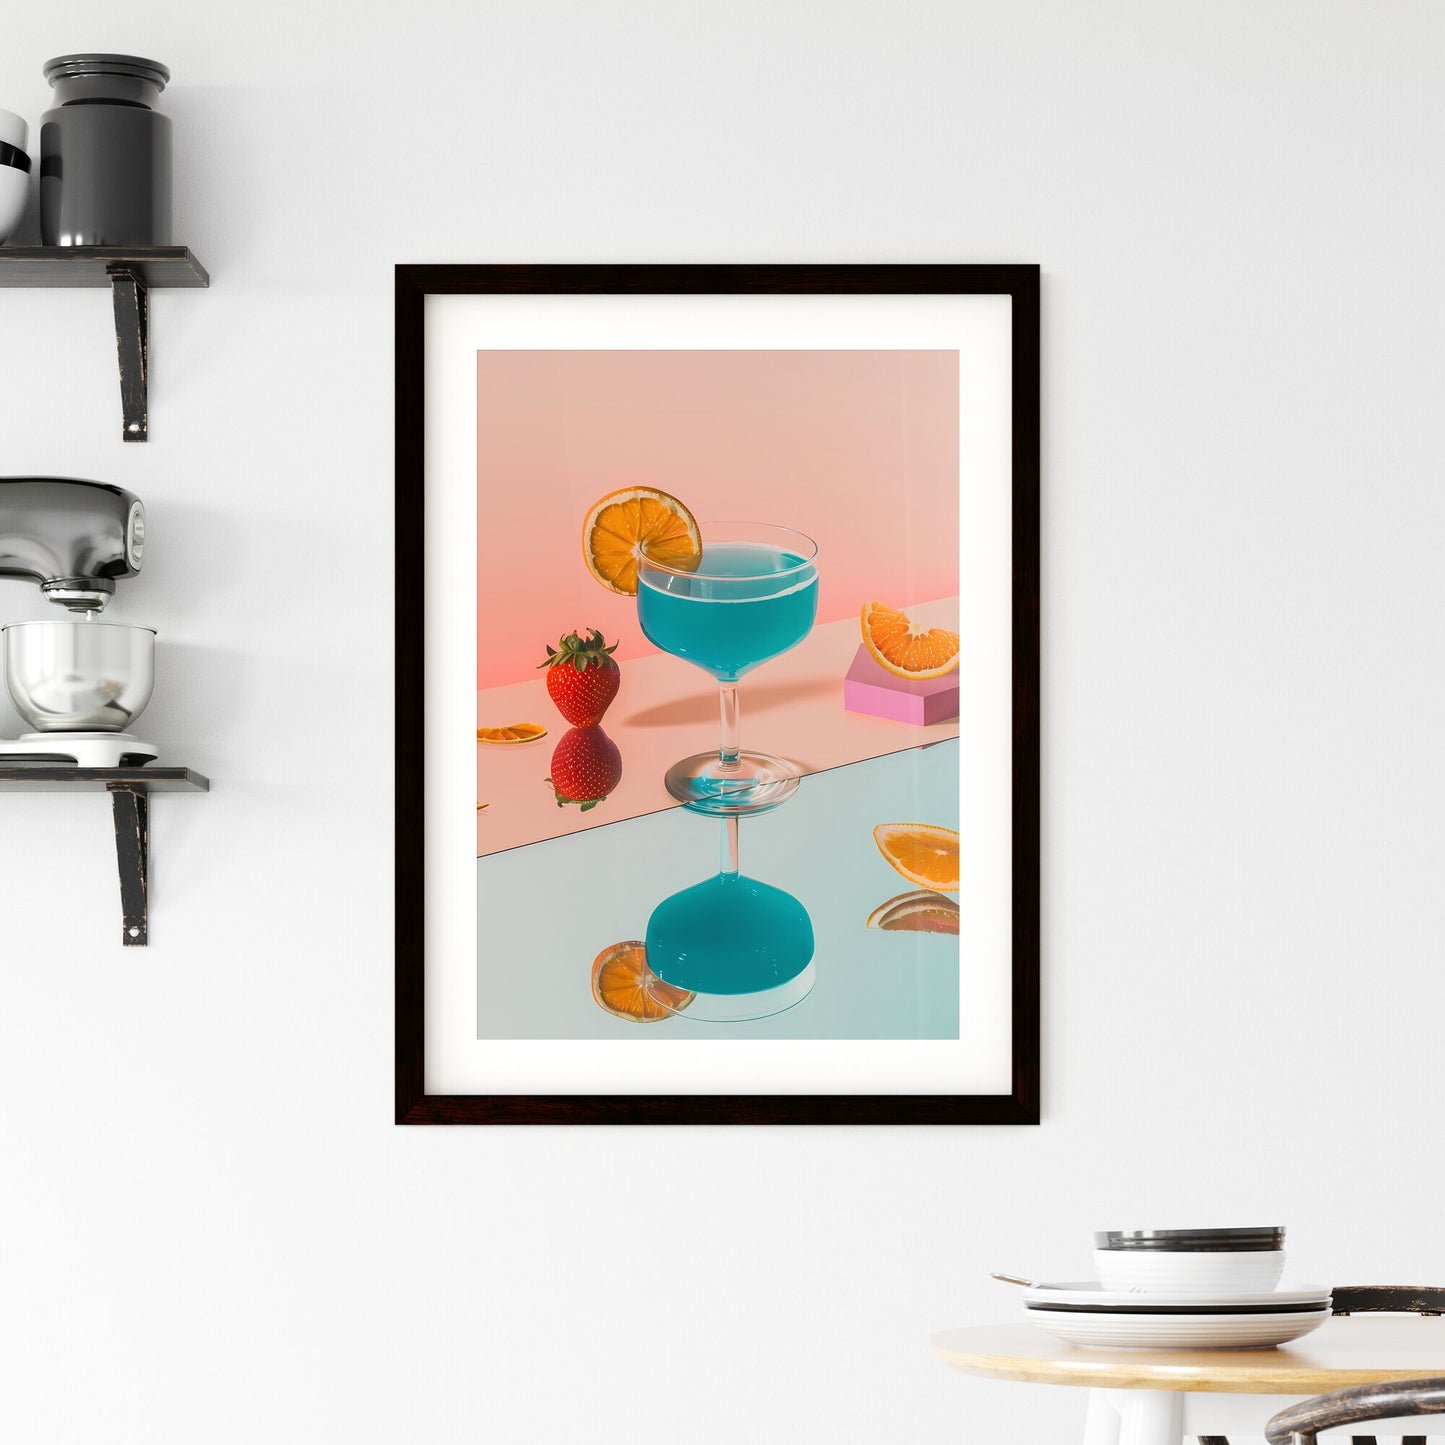 Isometric Perspective: Modern Still Life - Sleek and Vibrant Artistic Composition with Blue Drink, Dried Orange Slice, and Minimalist Setup Default Title